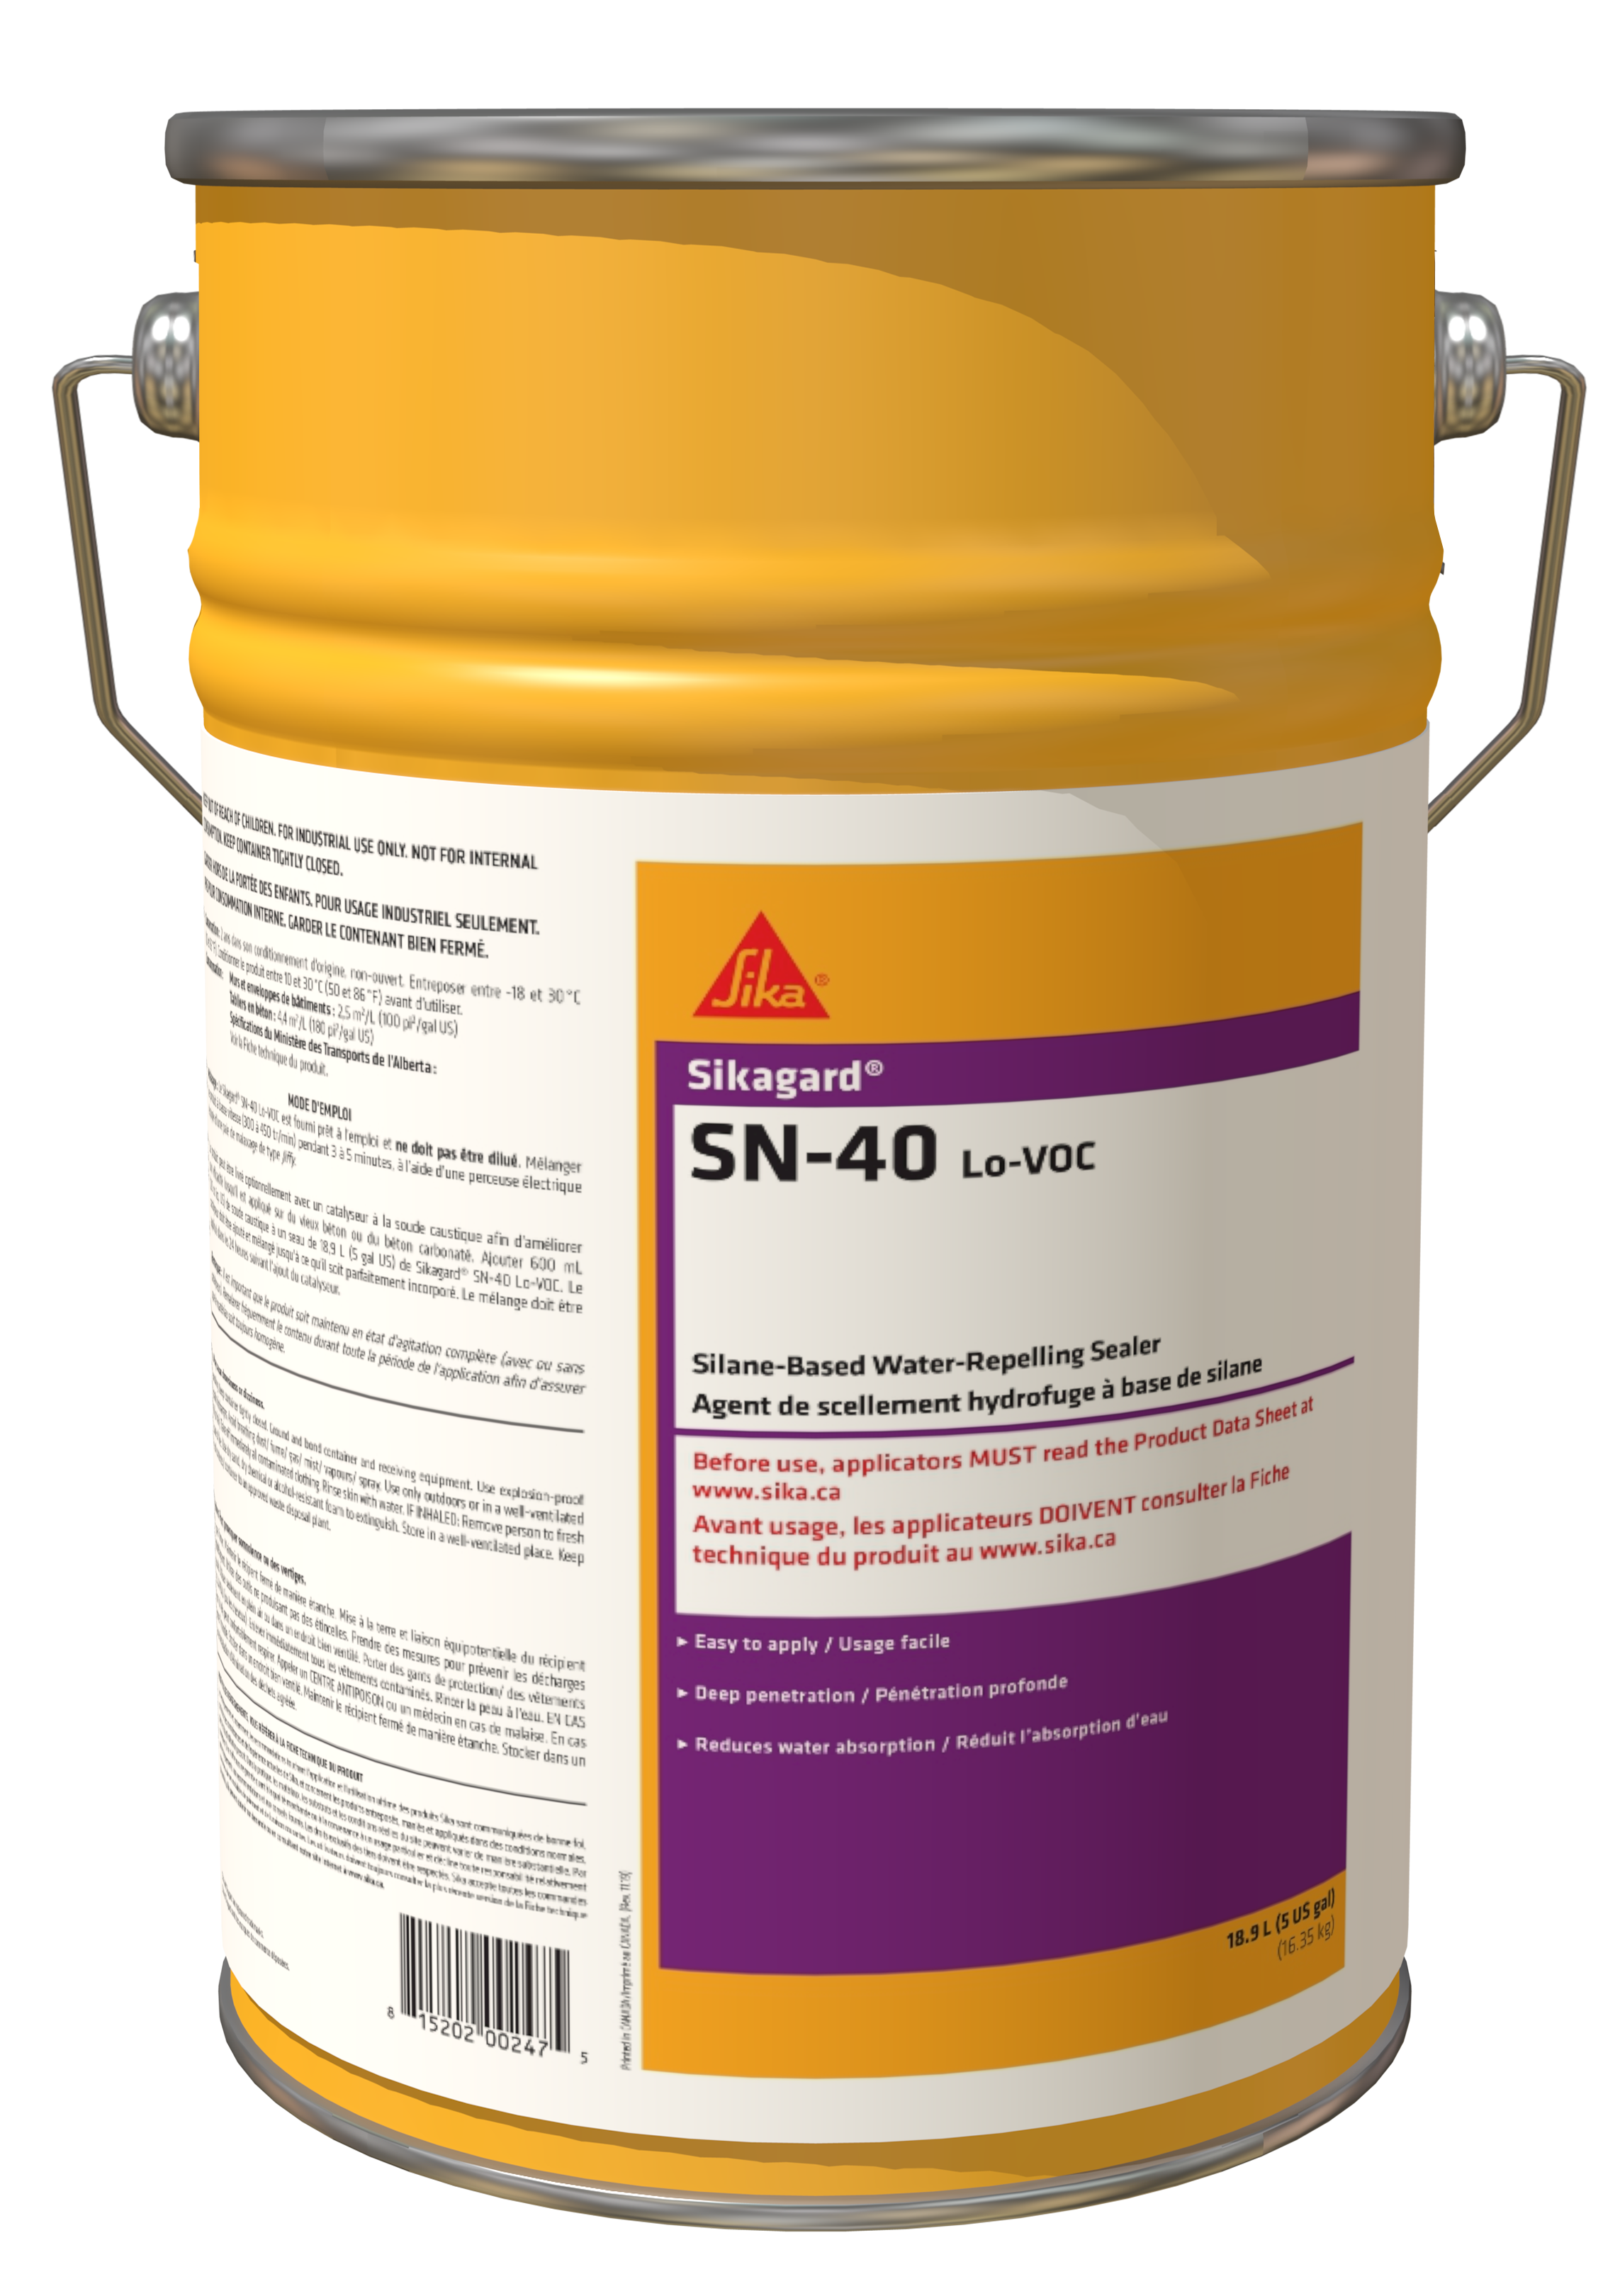 Sika (459933) product